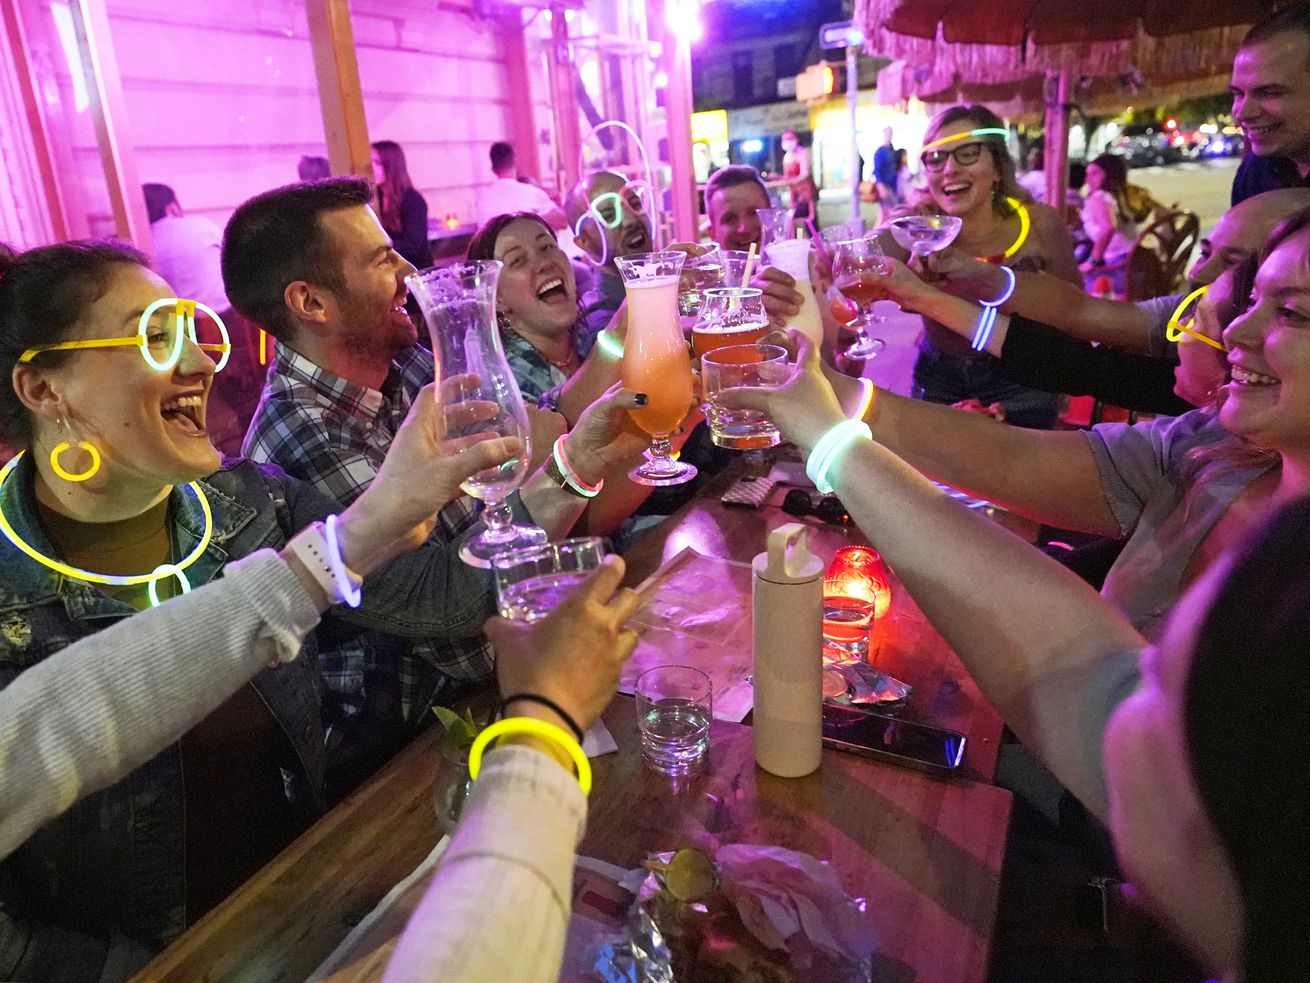 Emily Baumgartner, left, and Luke Finley, second from left, join friends from their church group in a birthday toast to one of the members, upper right, during their weekly “Monday Night Hang” gathering at the Tiki Bar on Manhattan’s Upper West Side Monday, May 17, 2021, in New York.